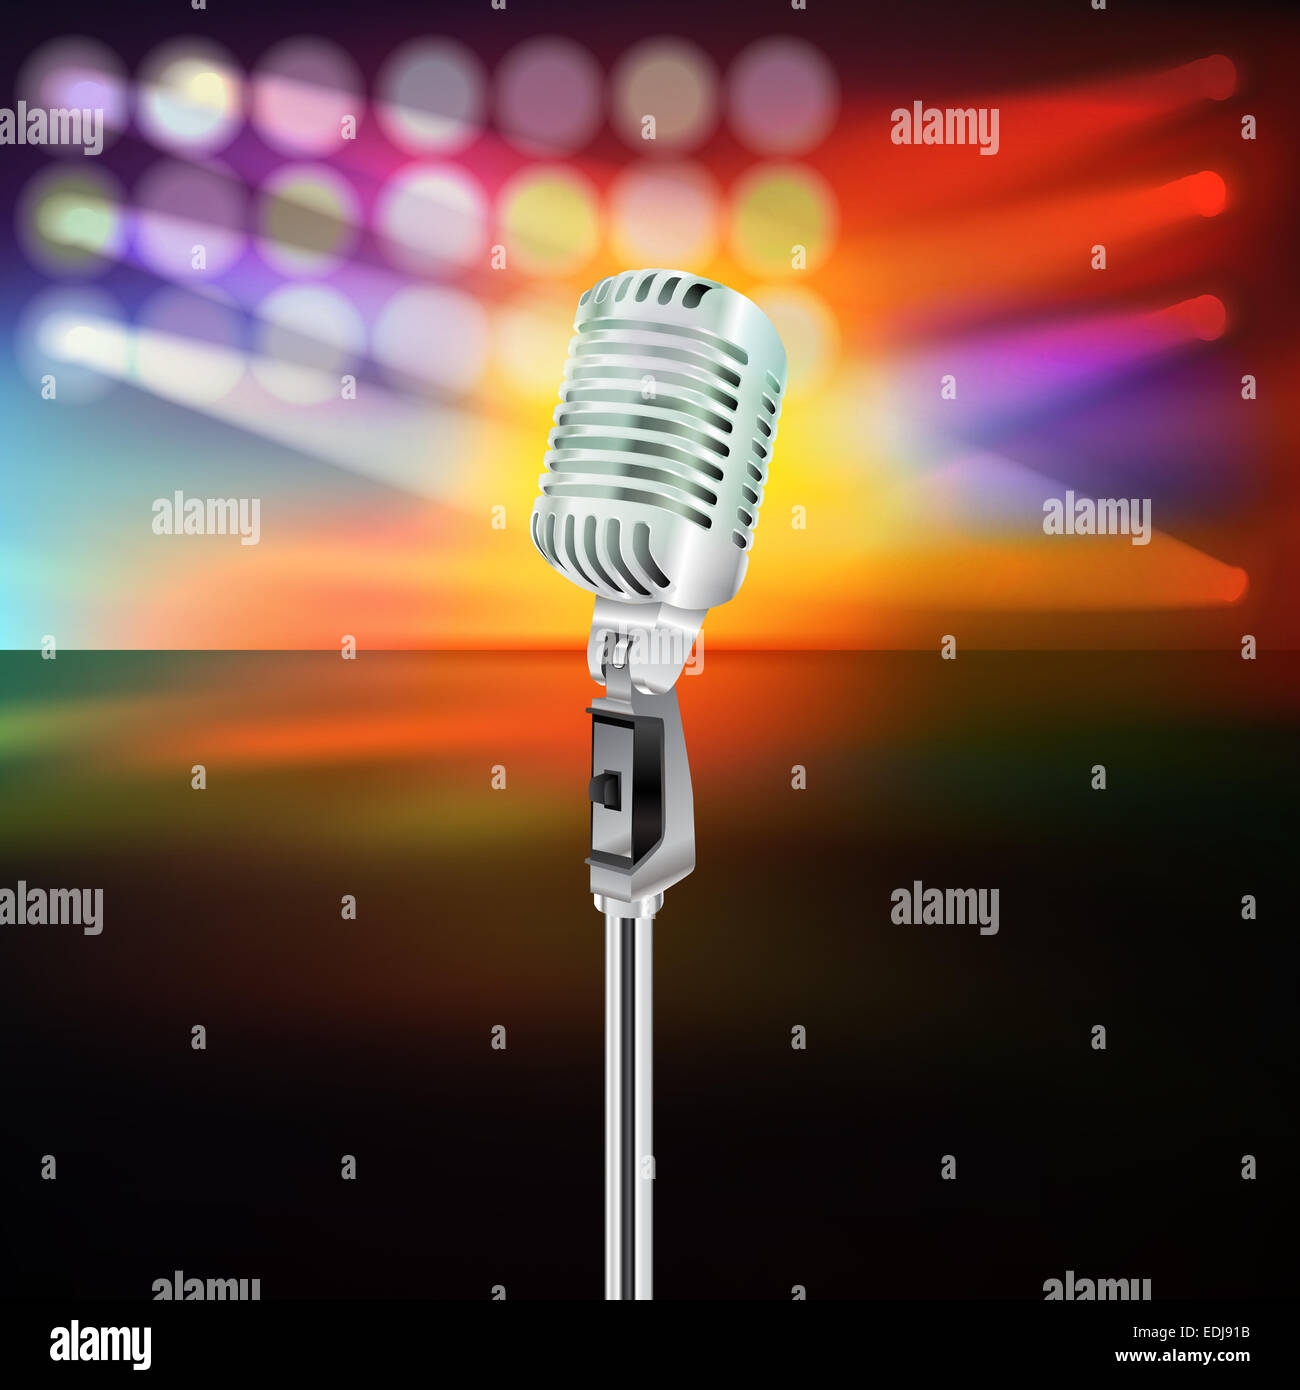 abstract background with microphone on music stage Stock Photo